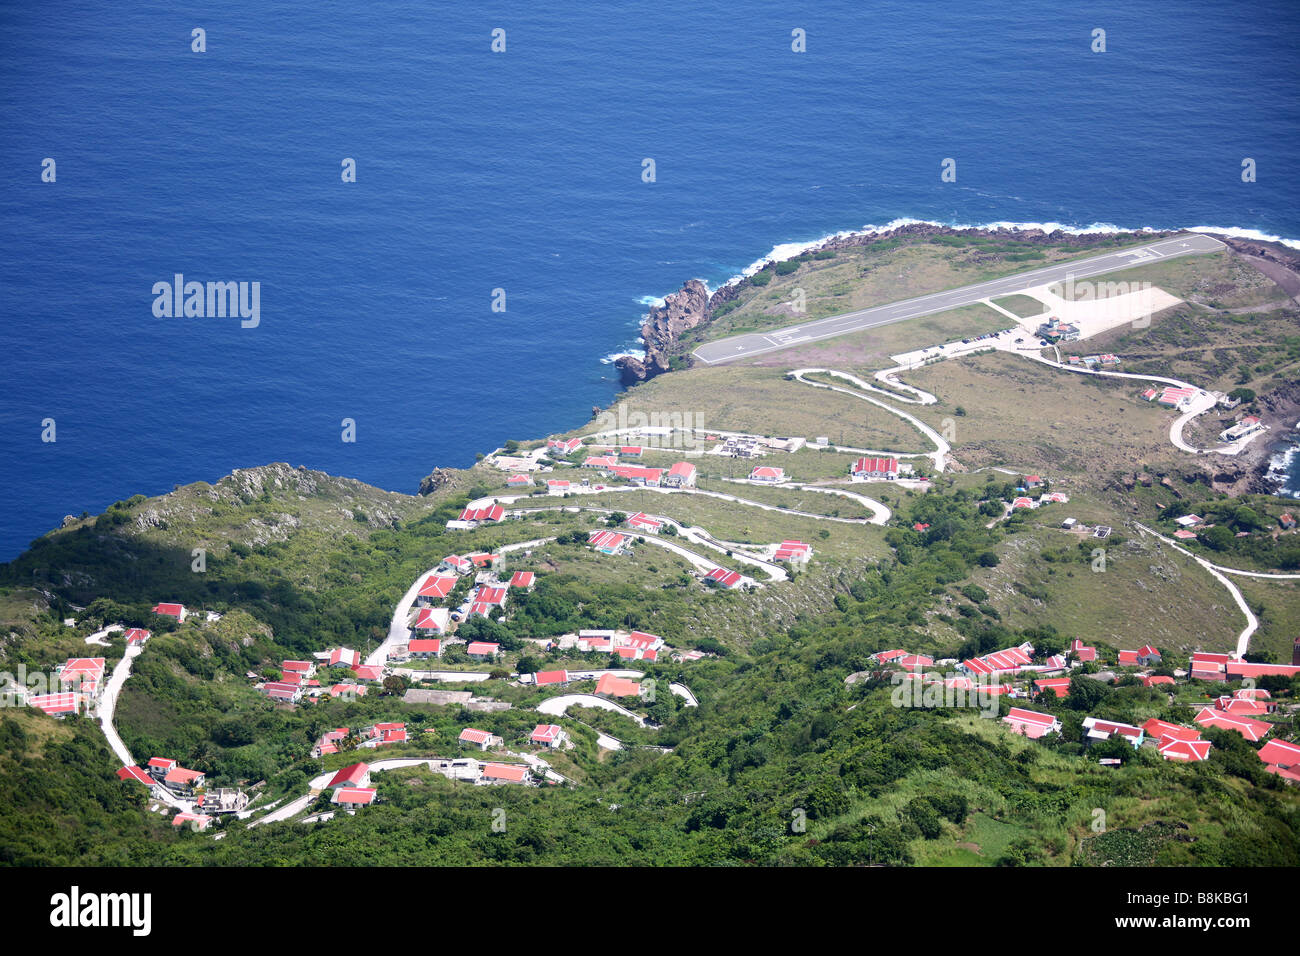 View From Mount Scenery On The Airstrip Of Juancho E Yrausquin Stock Photo Alamy